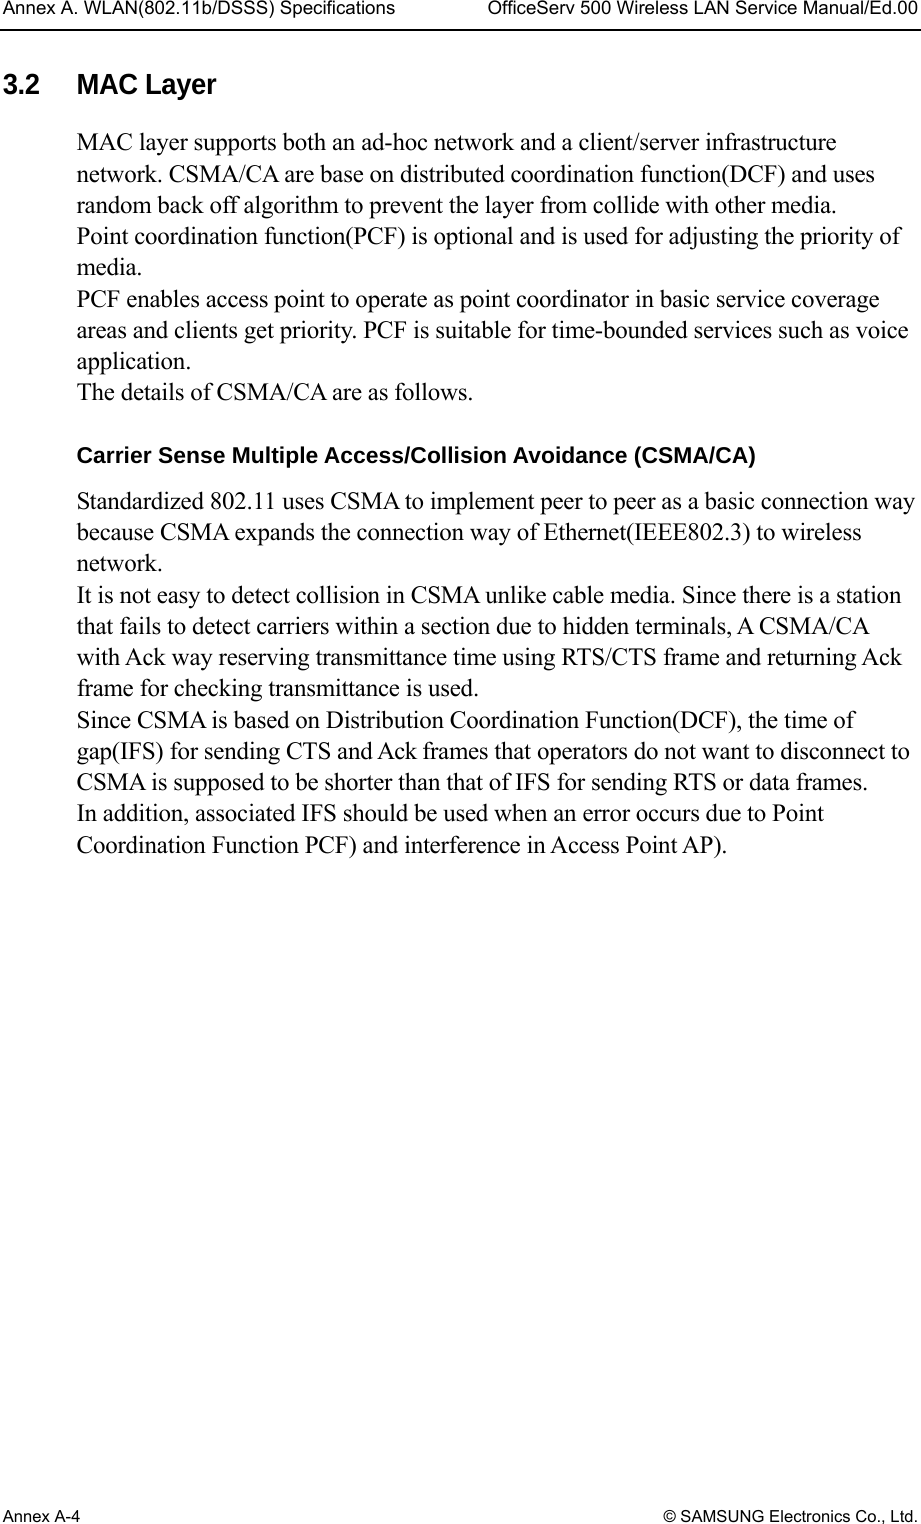 Annex A. WLAN(802.11b/DSSS) Specifications  OfficeServ 500 Wireless LAN Service Manual/Ed.00 Annex A-4 © SAMSUNG Electronics Co., Ltd. 3.2 MAC Layer MAC layer supports both an ad-hoc network and a client/server infrastructure network. CSMA/CA are base on distributed coordination function(DCF) and uses random back off algorithm to prevent the layer from collide with other media. Point coordination function(PCF) is optional and is used for adjusting the priority of media. PCF enables access point to operate as point coordinator in basic service coverage areas and clients get priority. PCF is suitable for time-bounded services such as voice application.  The details of CSMA/CA are as follows.  Carrier Sense Multiple Access/Collision Avoidance (CSMA/CA) Standardized 802.11 uses CSMA to implement peer to peer as a basic connection way because CSMA expands the connection way of Ethernet(IEEE802.3) to wireless network. It is not easy to detect collision in CSMA unlike cable media. Since there is a station that fails to detect carriers within a section due to hidden terminals, A CSMA/CA with Ack way reserving transmittance time using RTS/CTS frame and returning Ack frame for checking transmittance is used. Since CSMA is based on Distribution Coordination Function(DCF), the time of gap(IFS) for sending CTS and Ack frames that operators do not want to disconnect to CSMA is supposed to be shorter than that of IFS for sending RTS or data frames.   In addition, associated IFS should be used when an error occurs due to Point Coordination Function PCF) and interference in Access Point AP).  